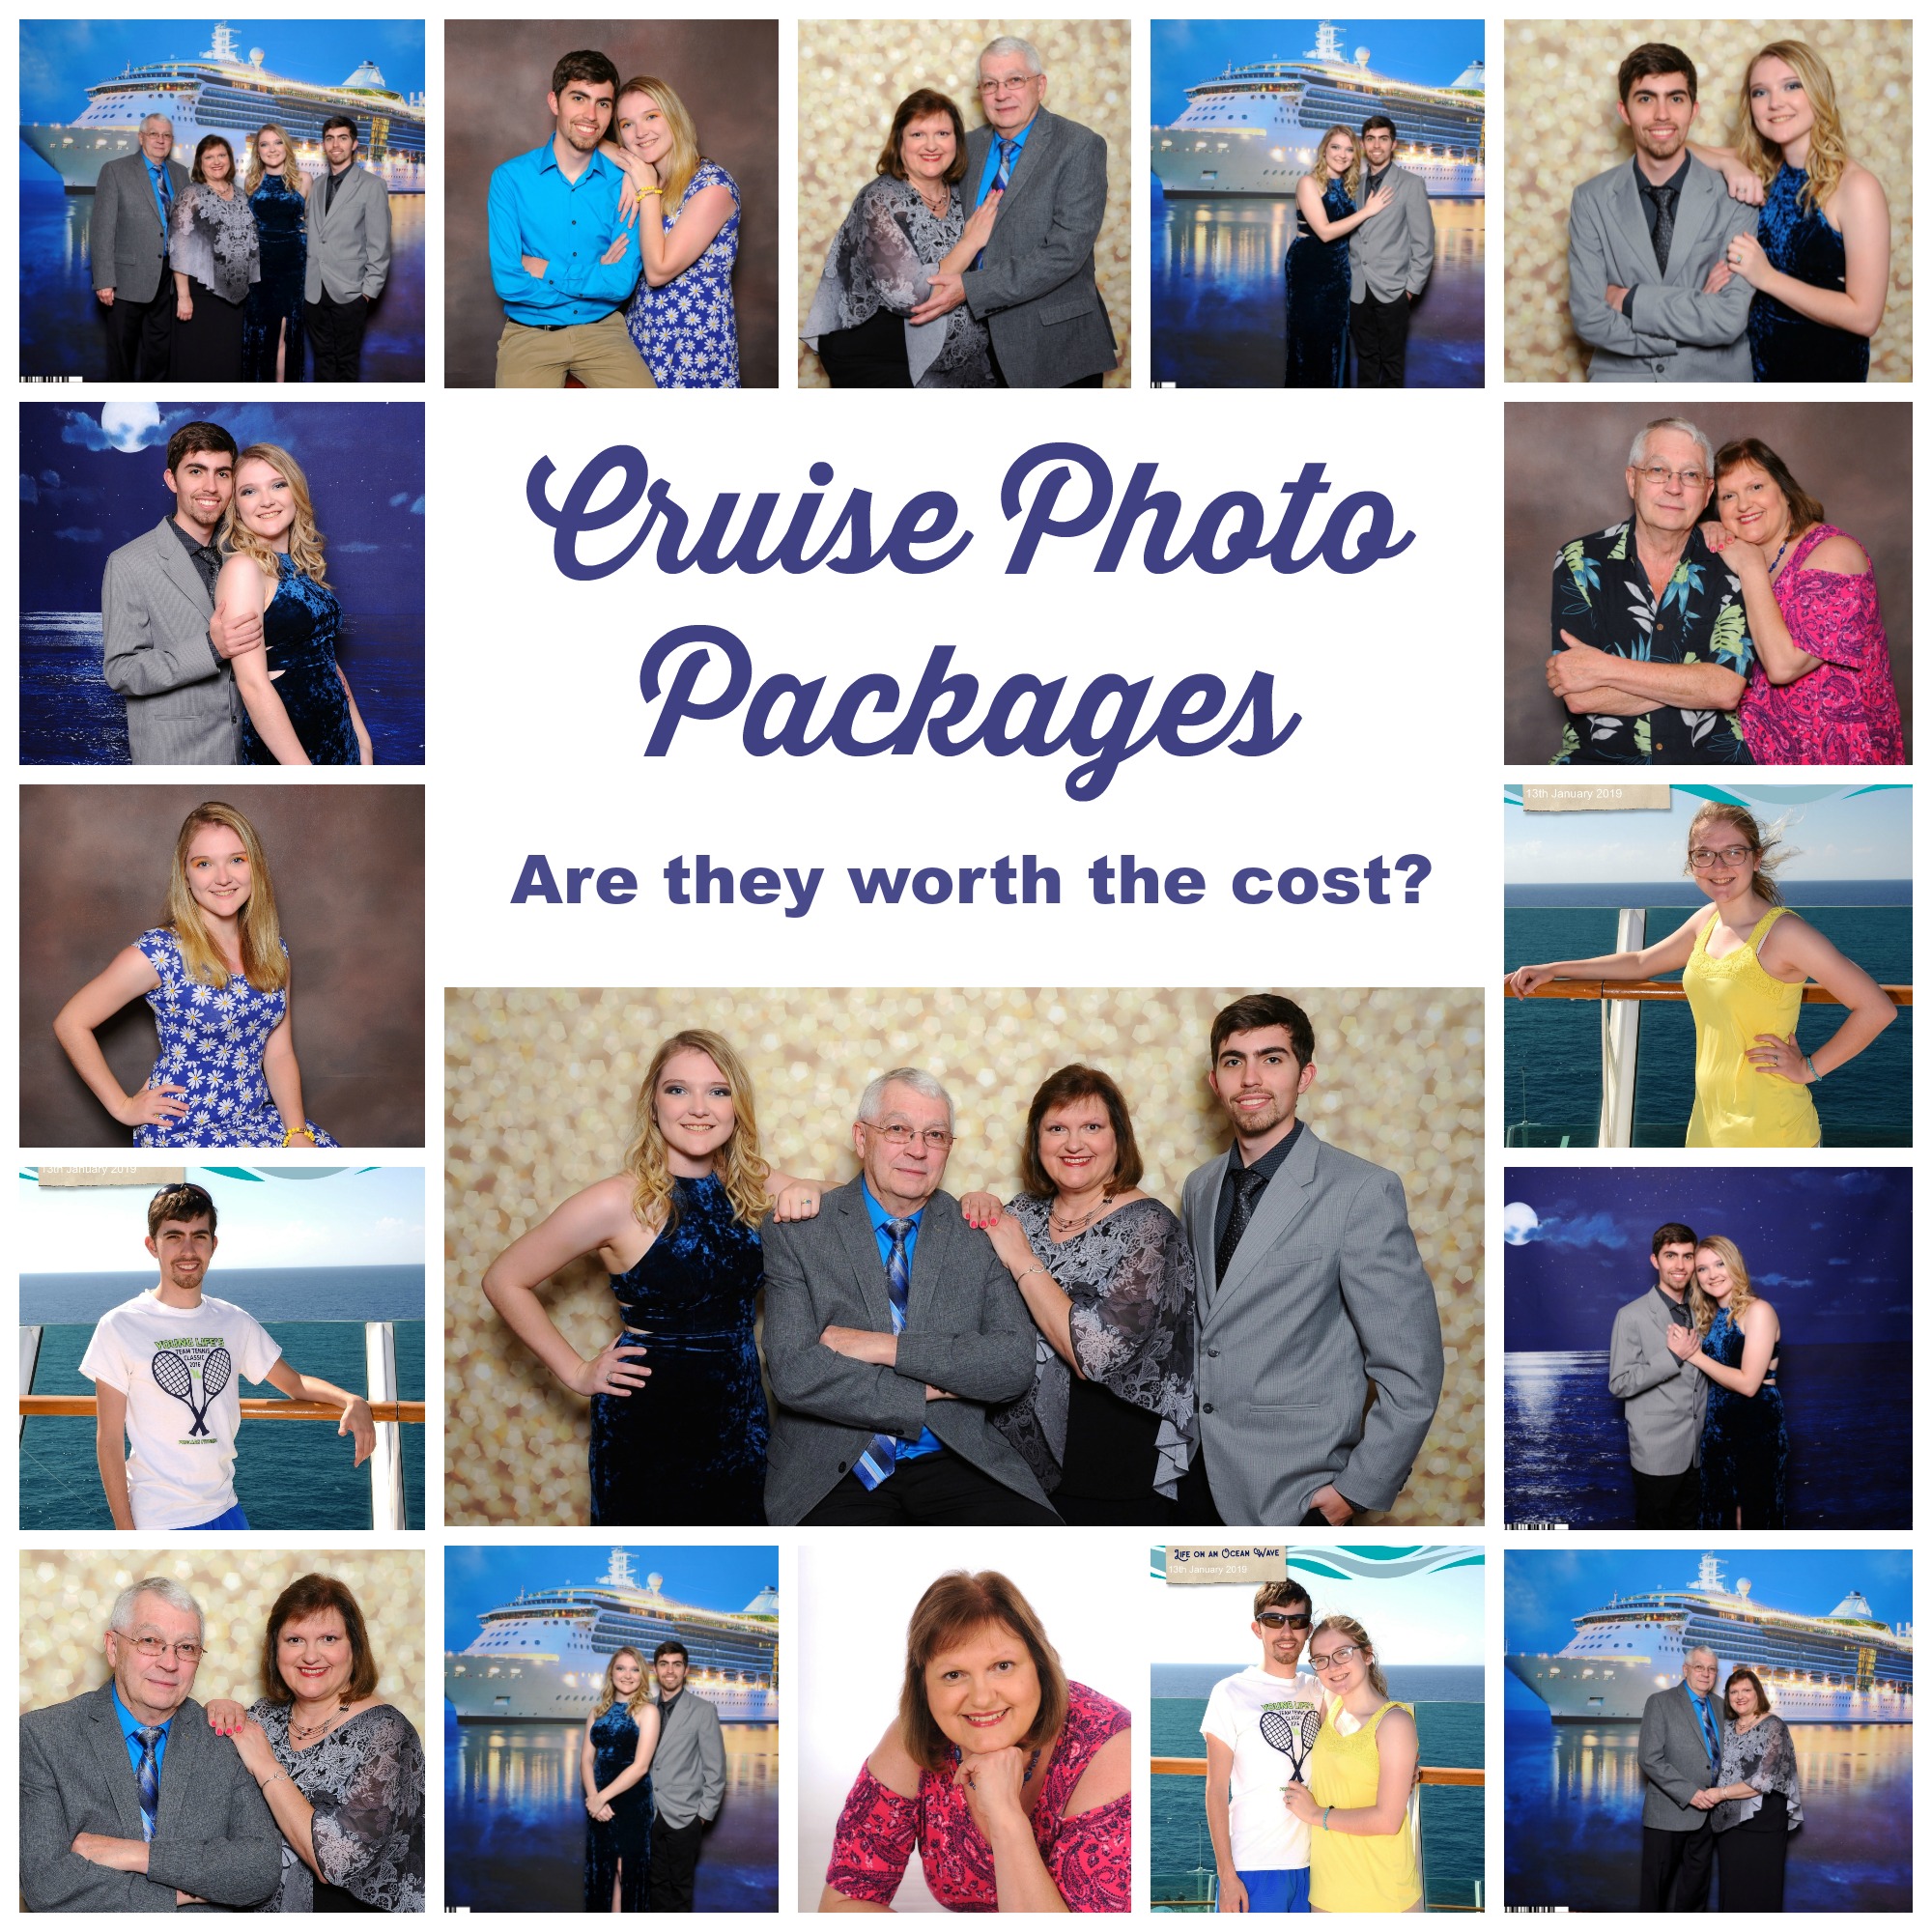 Cruise PHoto Packages